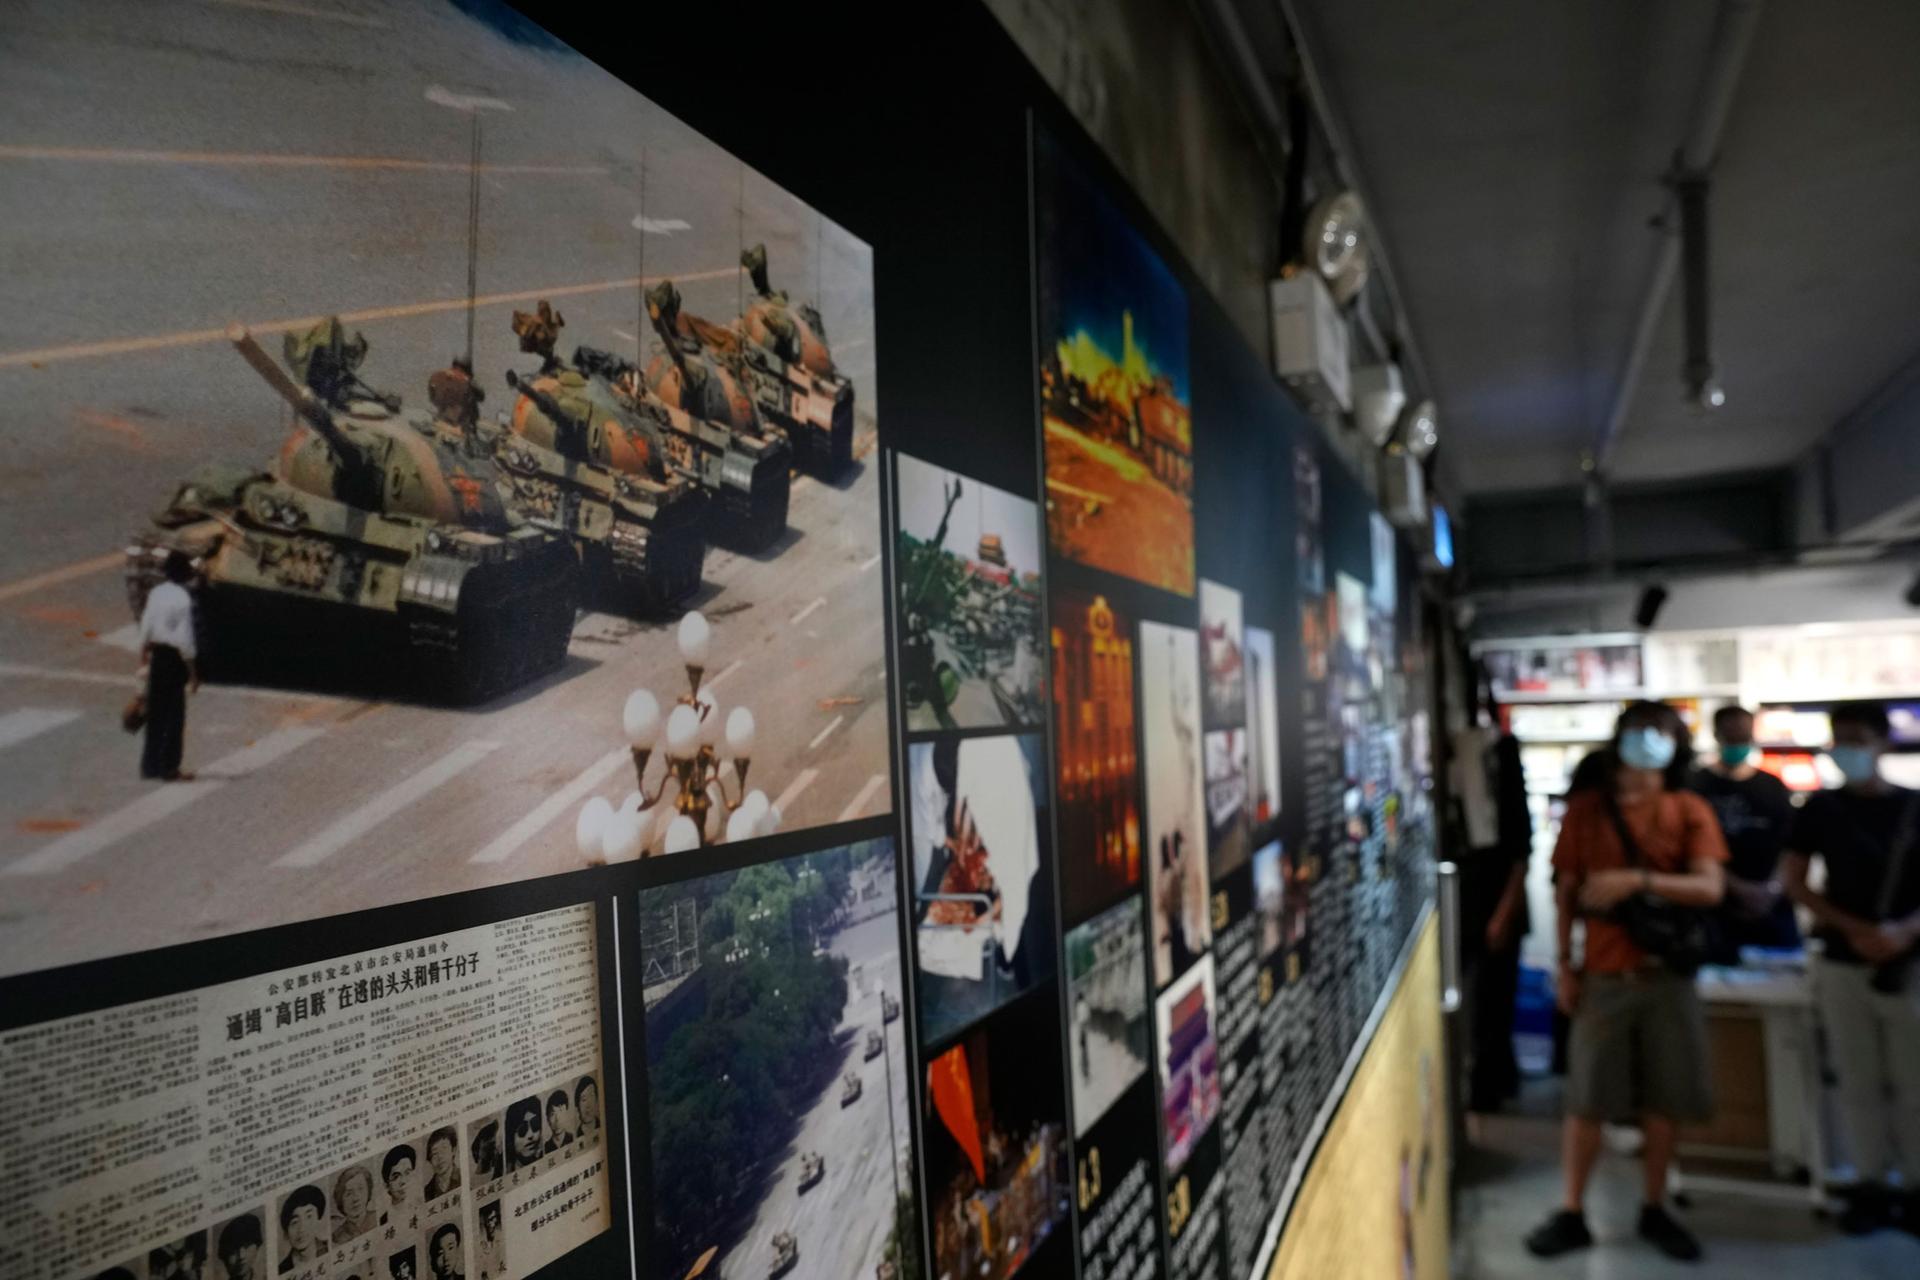 A photograph of a man blocking a line of four tanks in a street is shown hanging with other photographs and newspaper clippings.